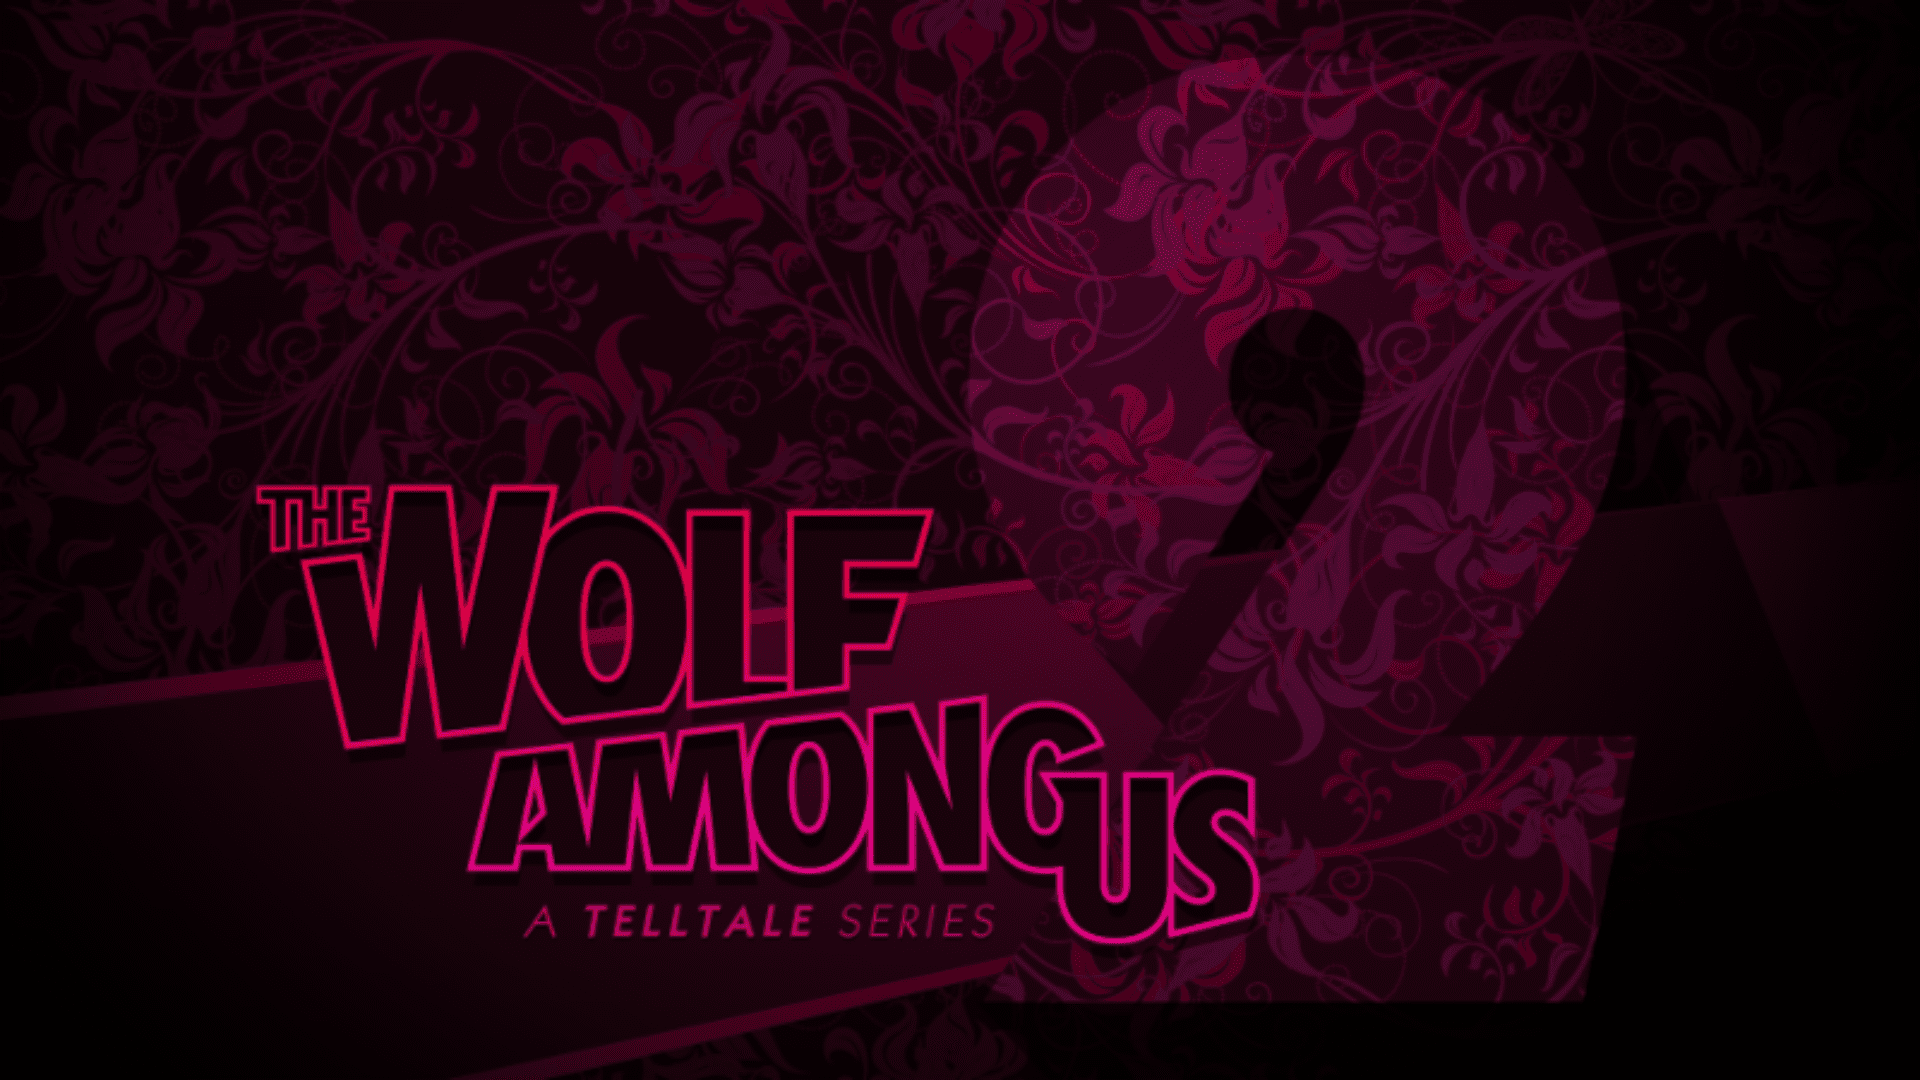 Telltale Games Confirms The Wolf Among Us Season 2 in 2018